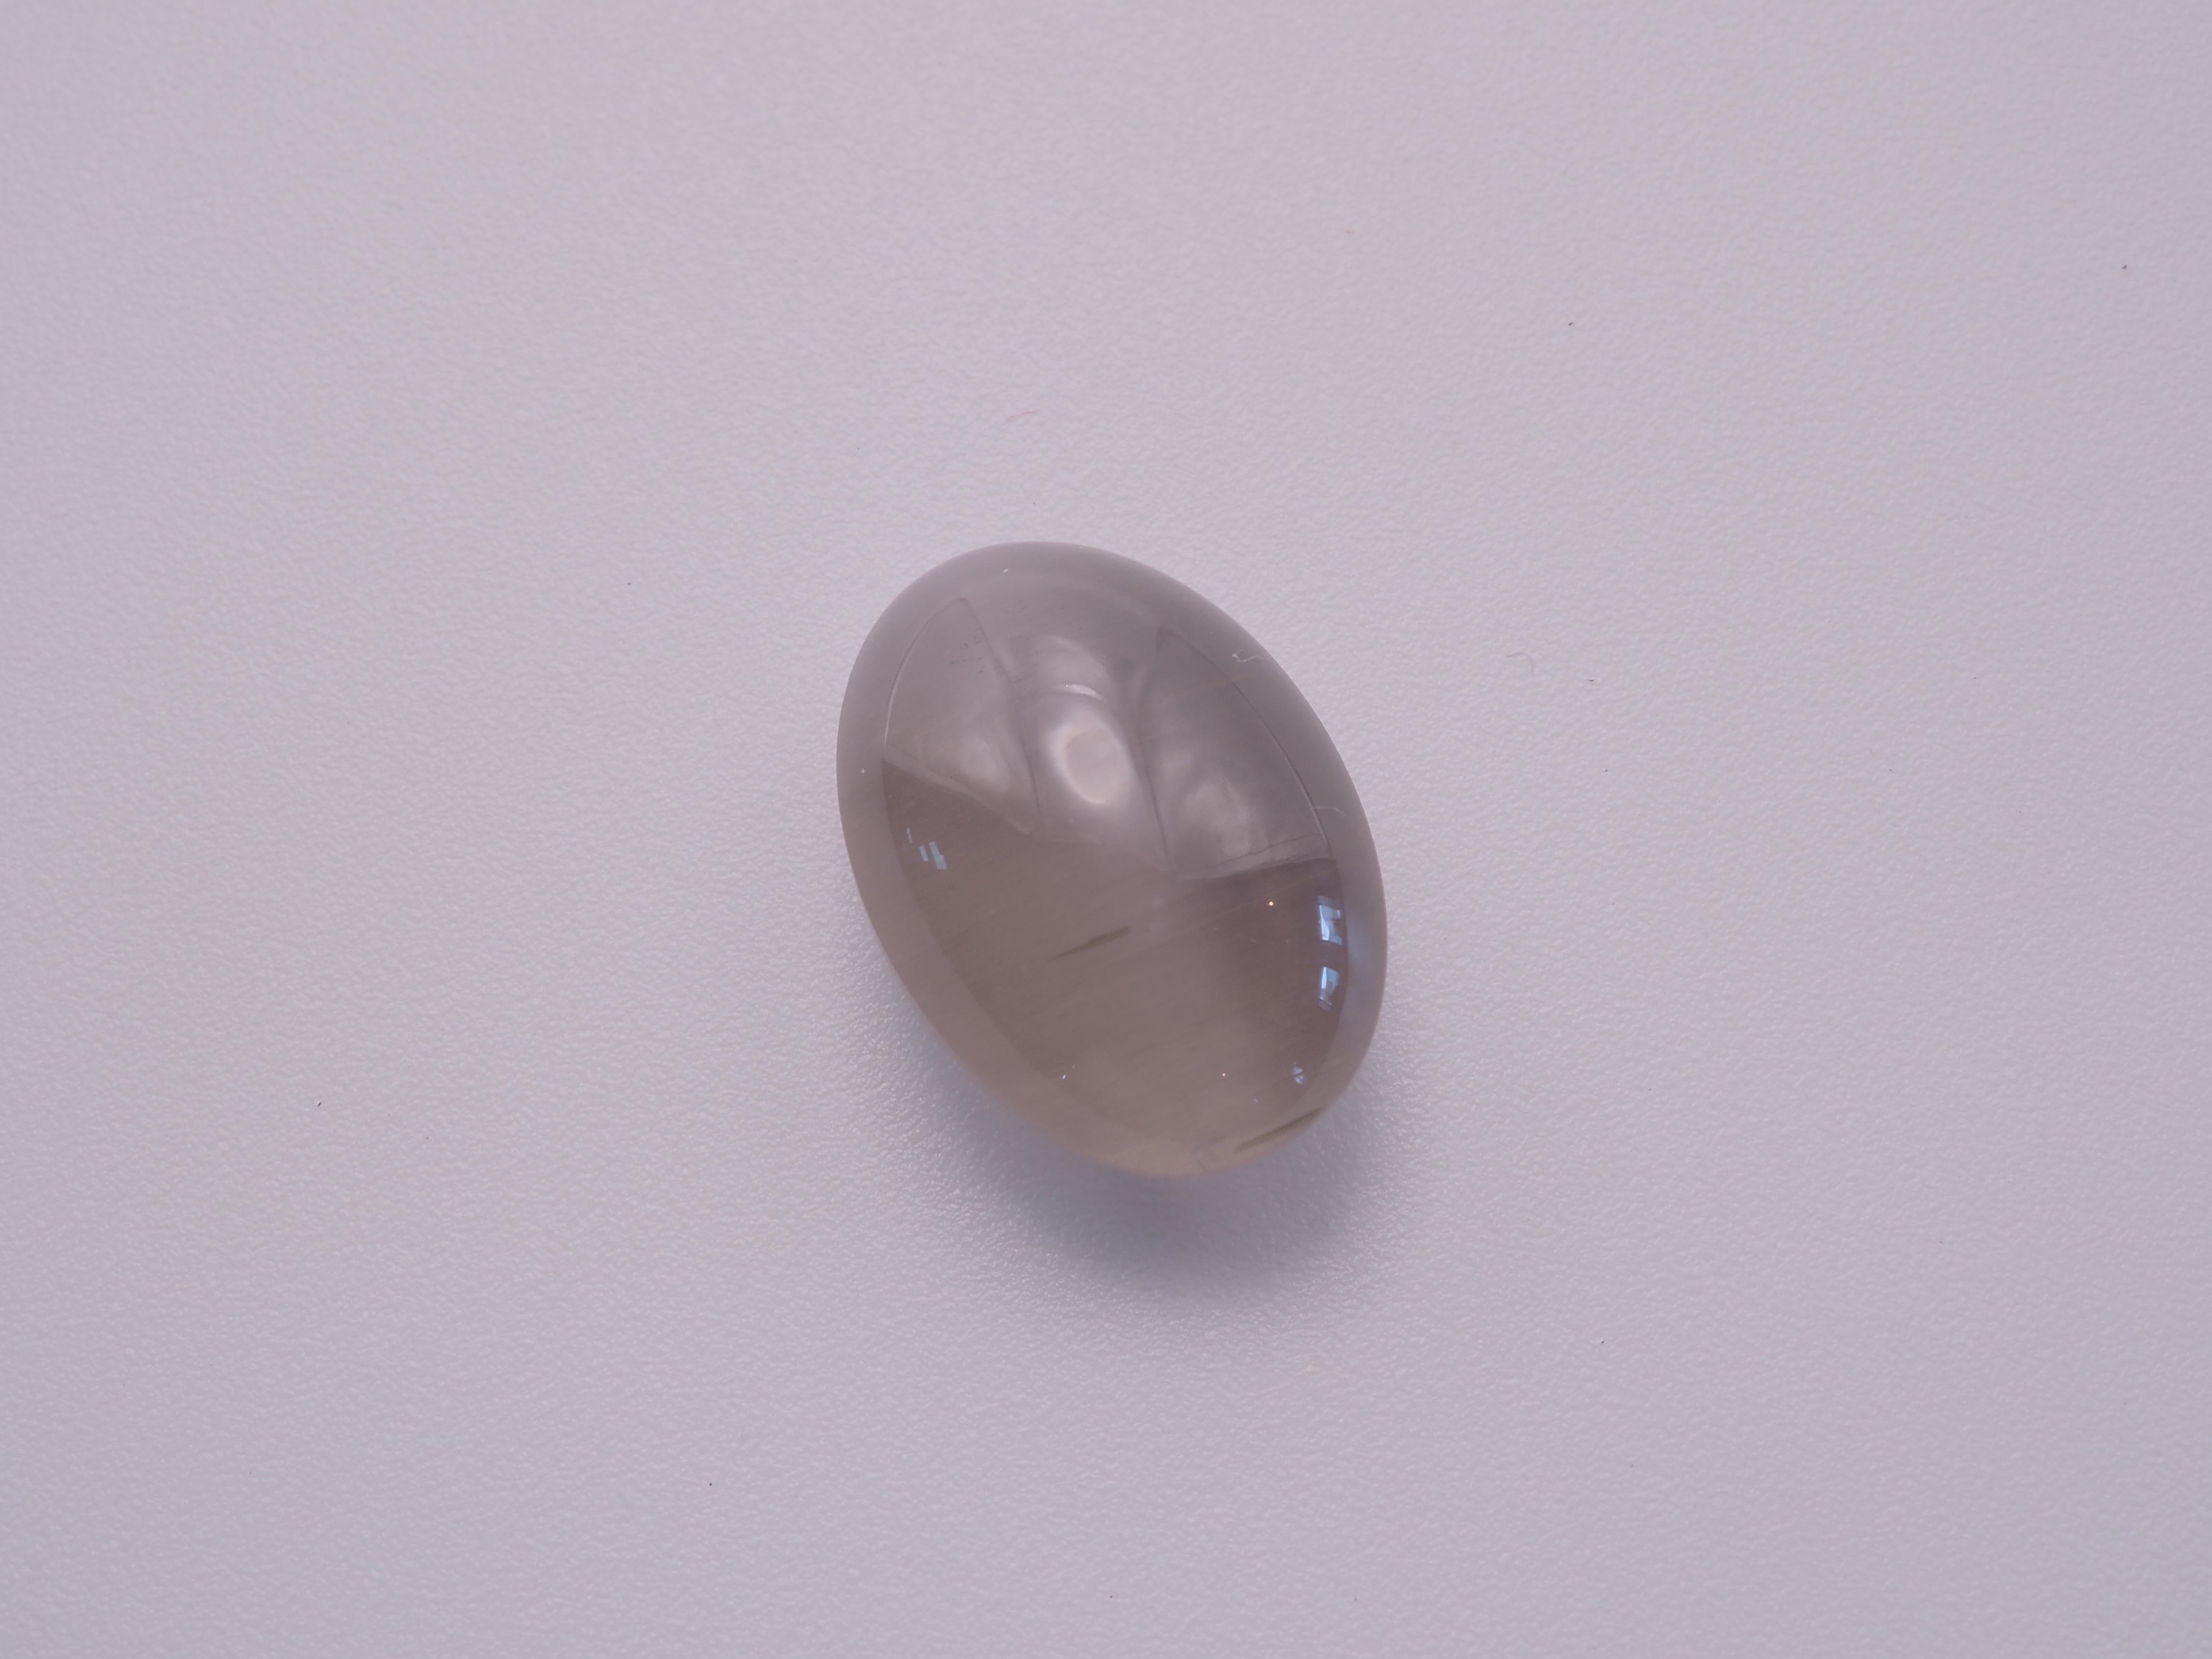 Cabochon GIT Certified 4.29ct Cat's Eye Sillimanite, No treatment, 10.99x7.80x5.52 mm For Sale